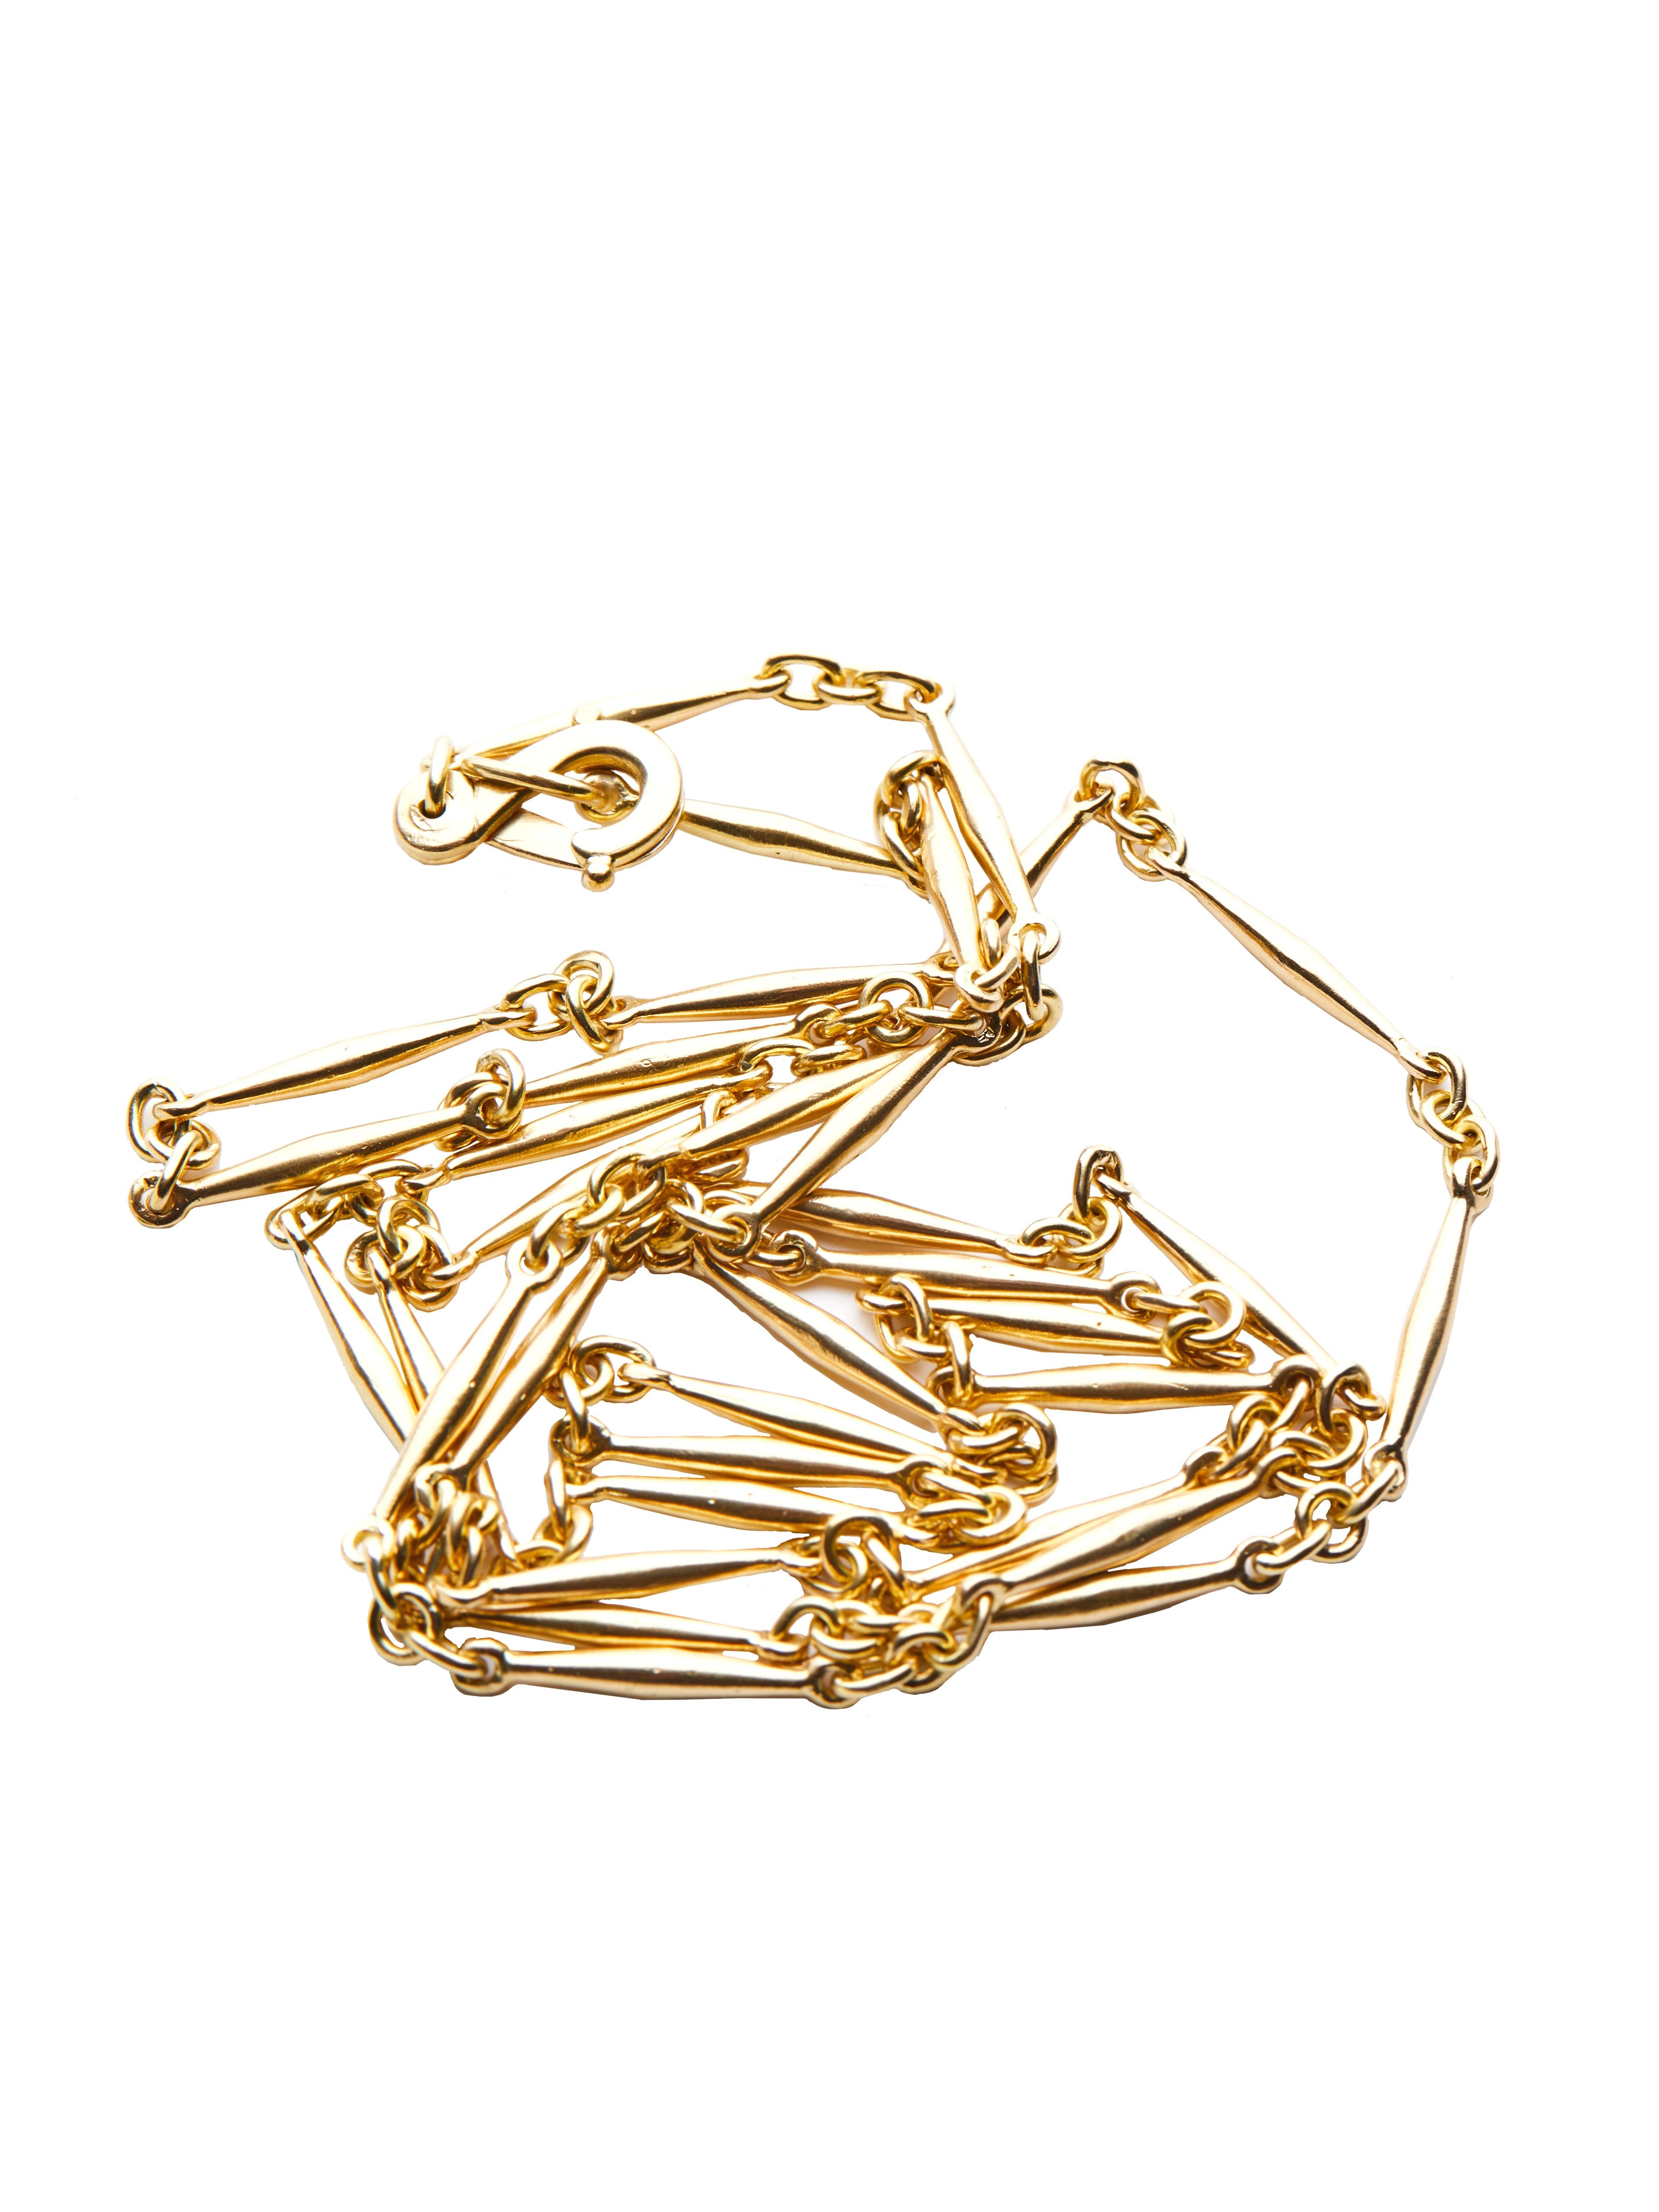 This contemporary motif links chain necklace is designed by Christina Alexiou. It is crafted with 18k yellow gold and is handmade in Greece. 
Its style is quite versatile, as this piece can be worn as a long chain, or as a double - short necklace,